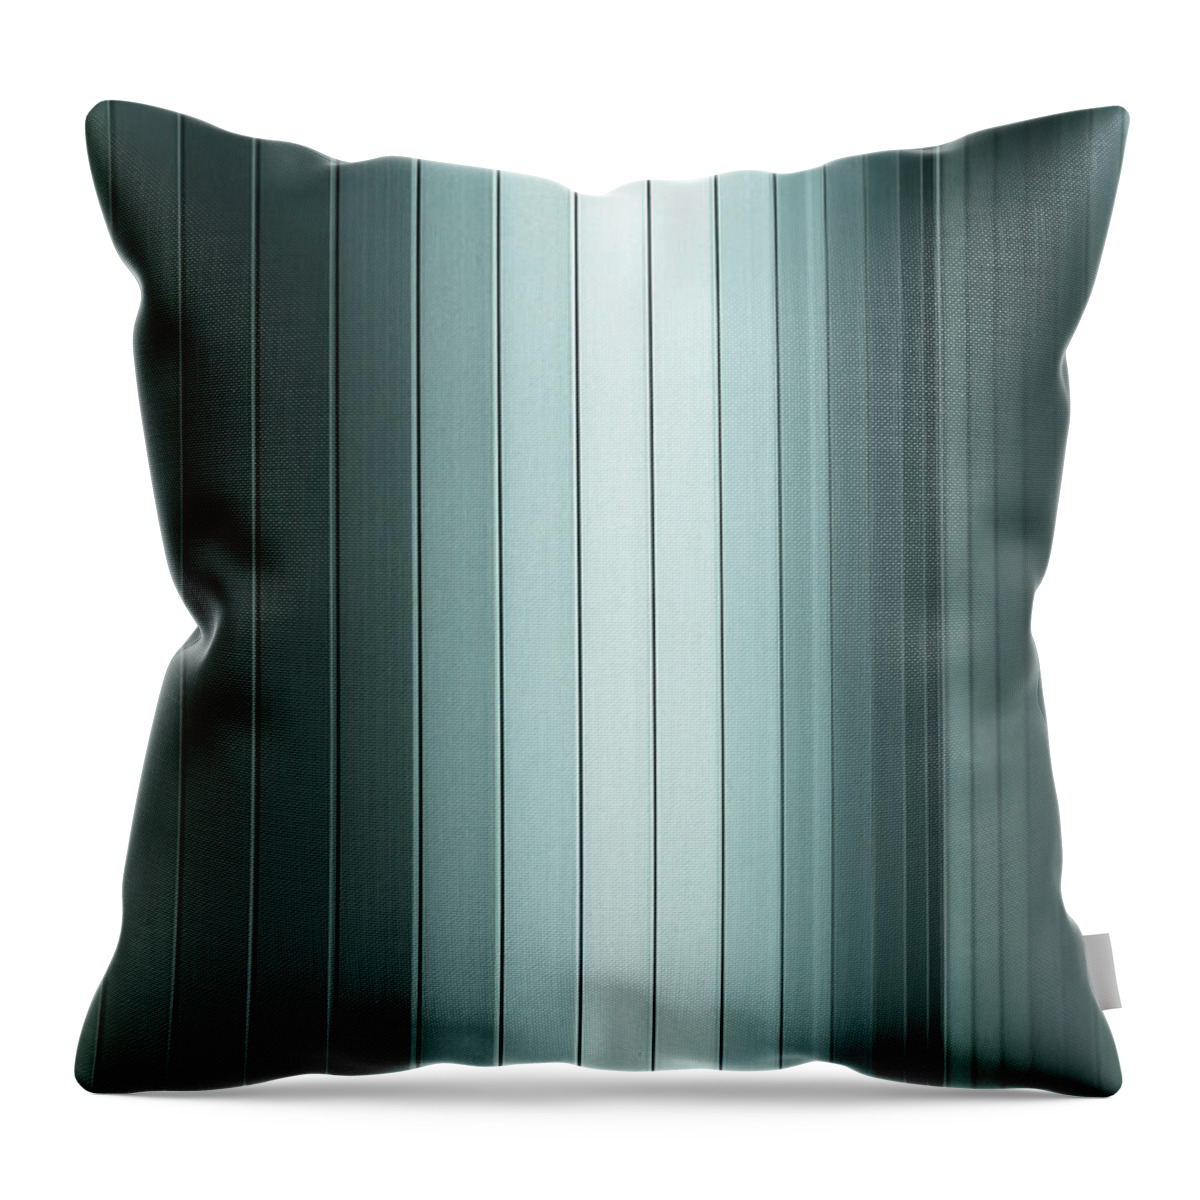 Berlin Throw Pillow featuring the photograph Metal Covered Columns by Ingo Jezierski